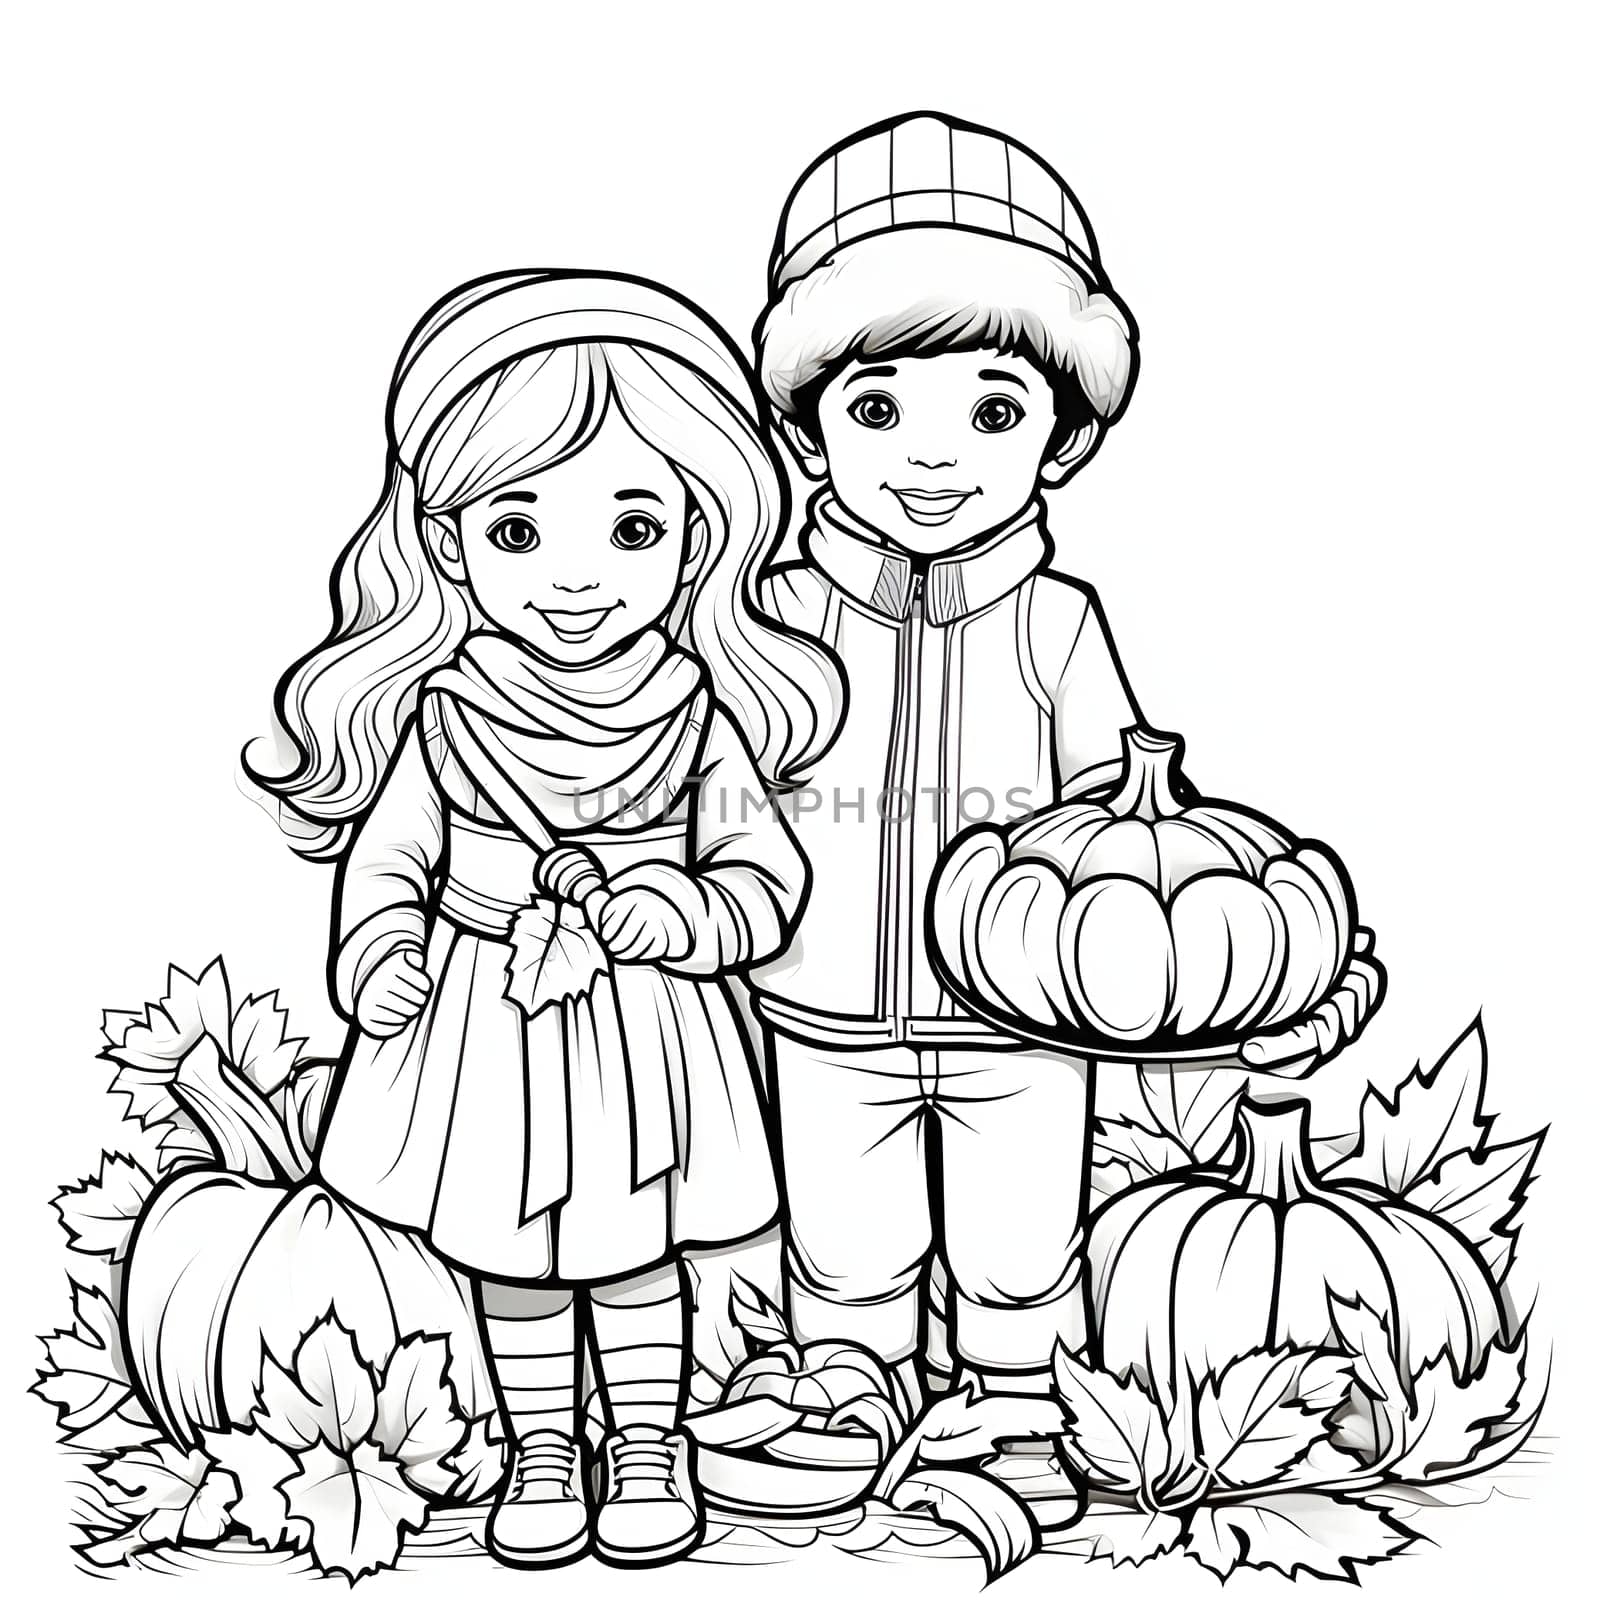 Black and White coloring book on it smiling children; boy and girl with pumpkins, leaves around. Pumpkin as a dish of thanksgiving for the harvest. An atmosphere of joy and celebration.